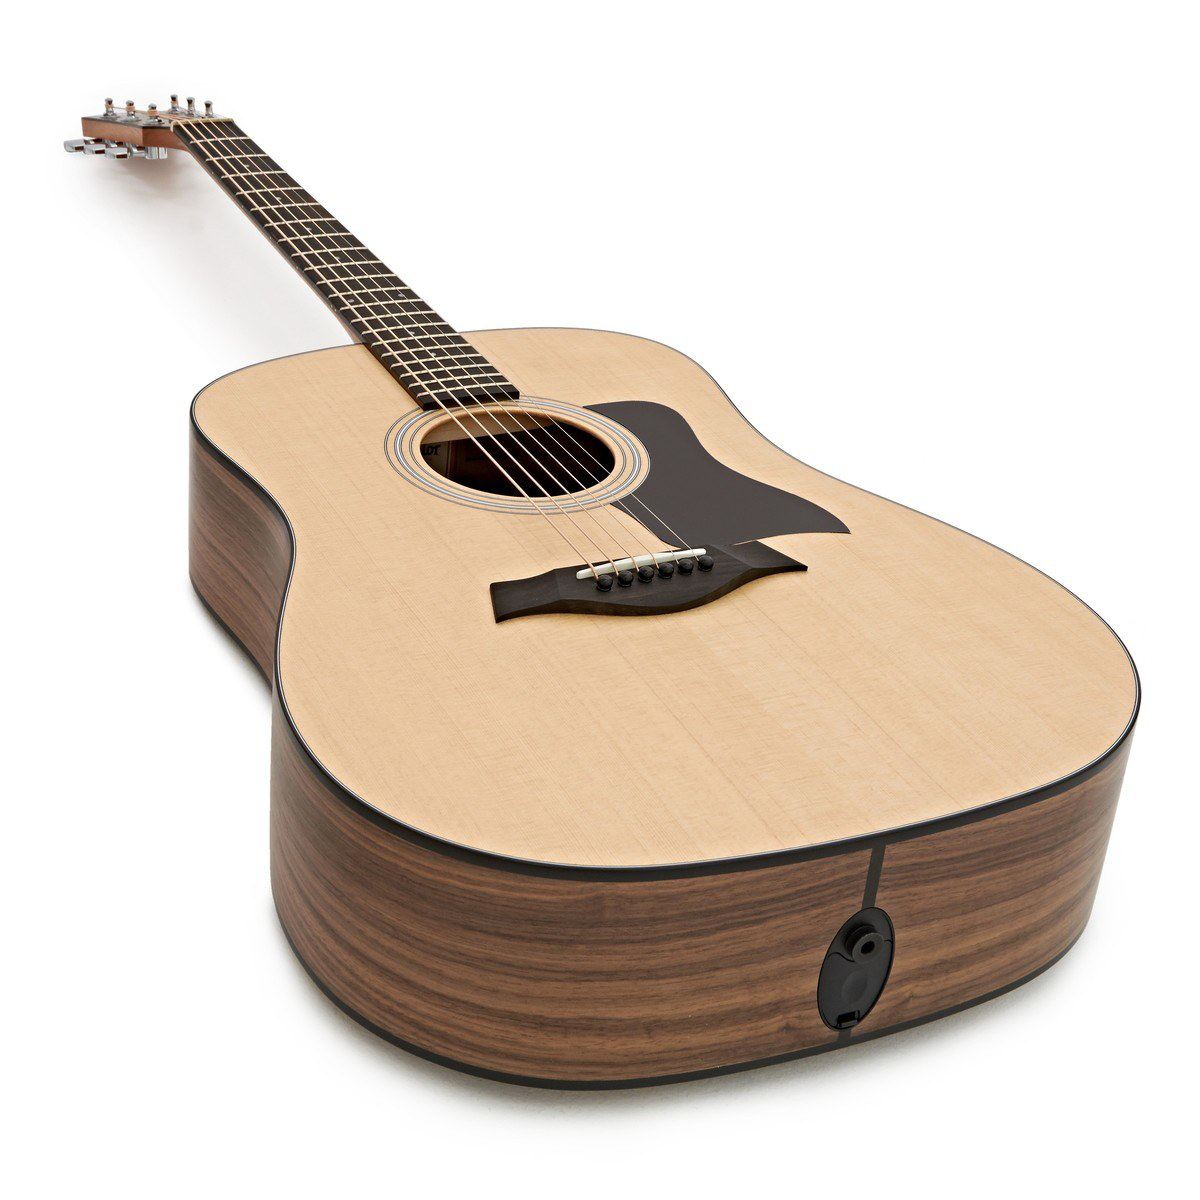 Taylor 110e - Best acoustic guitar for intermediate players